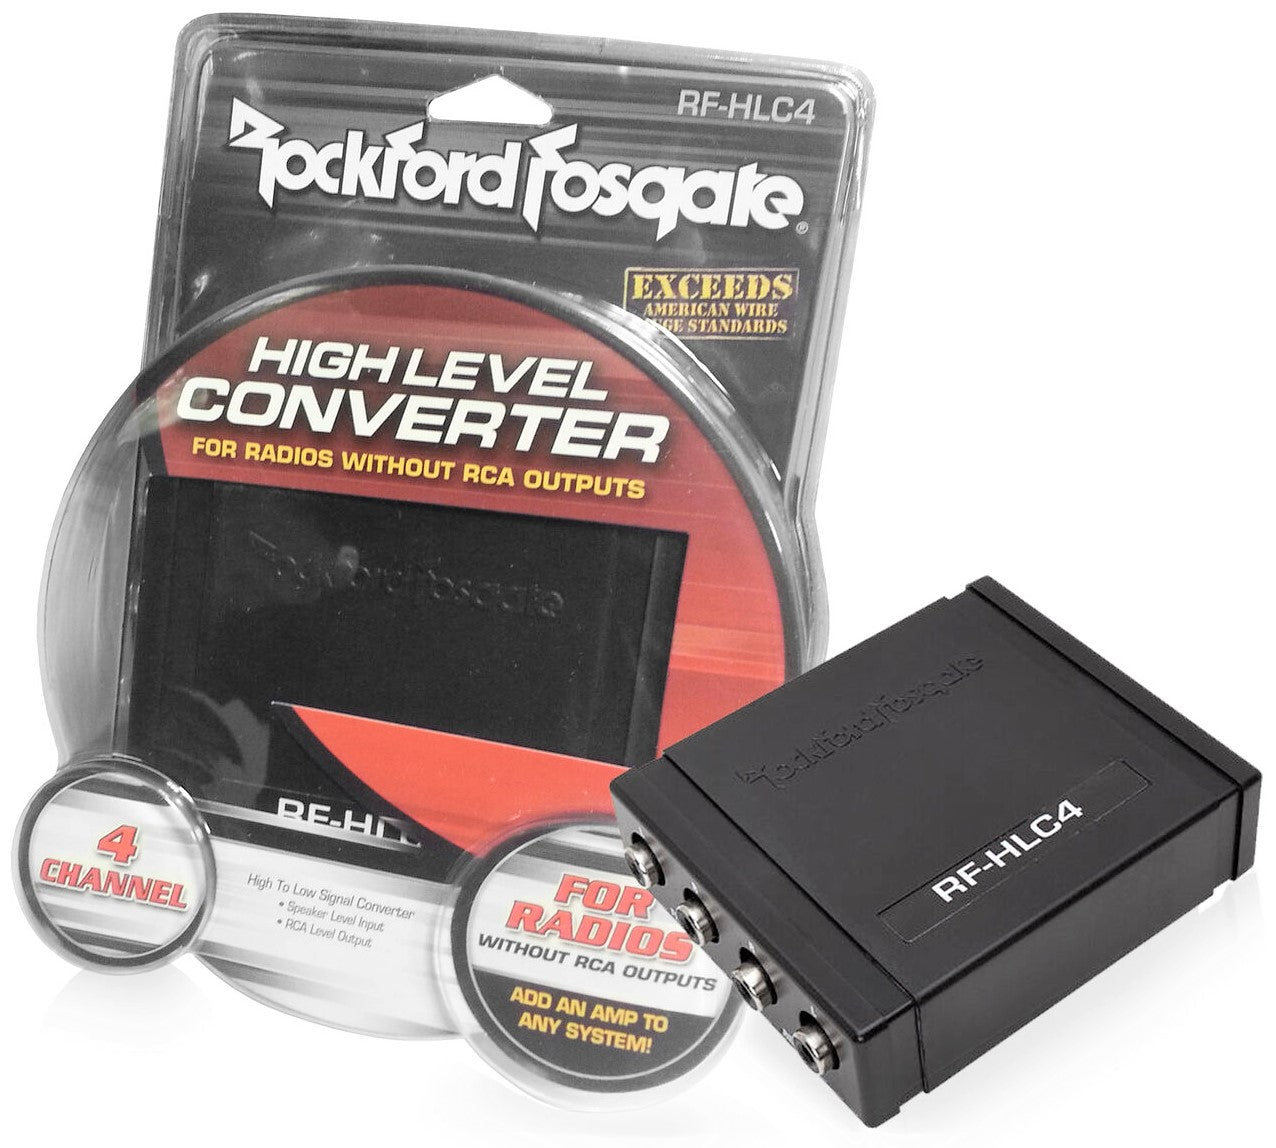 Rockford Fosgate 4 Channel High to Low RCA Level Output Radio Converter